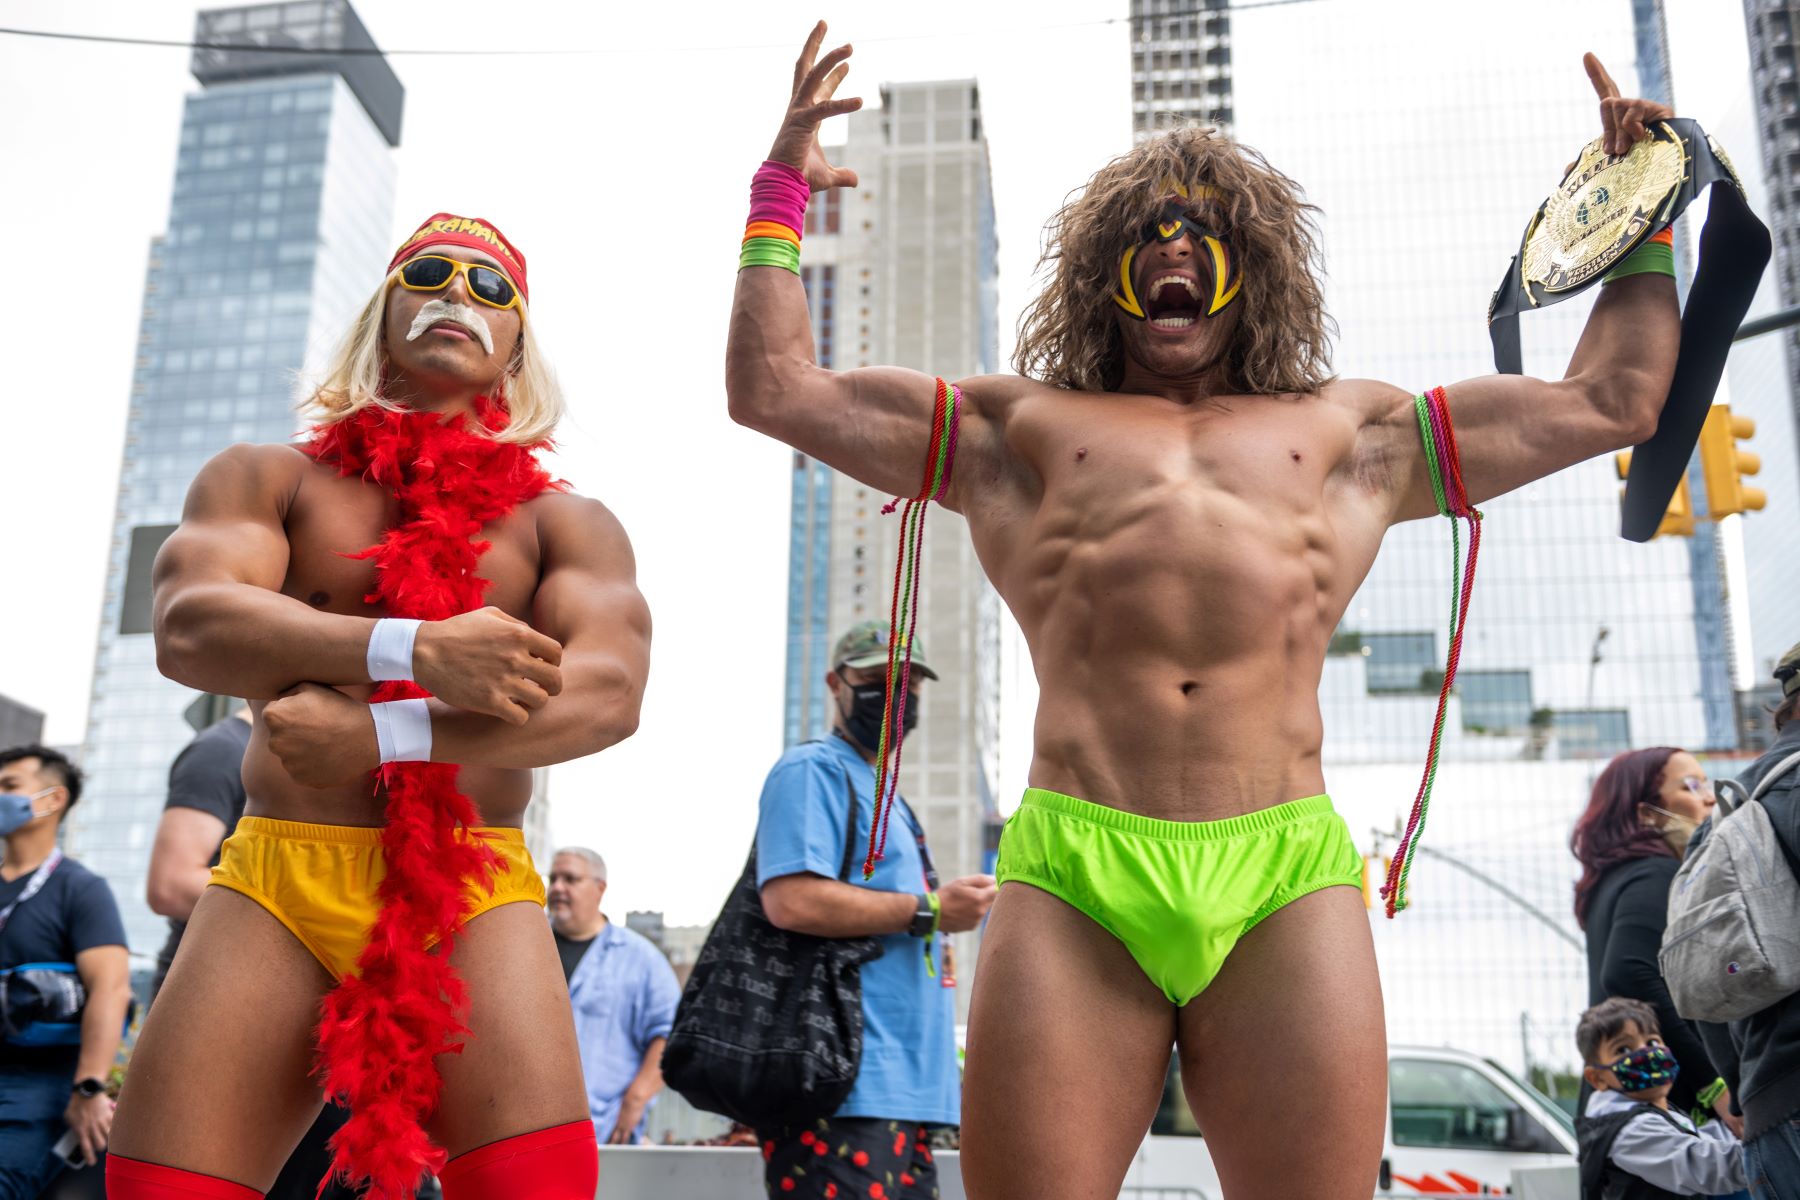 Cosplayers as WWE wrestlers Hulk Hogan and the Ultimate Warrior at the New York Comic Con